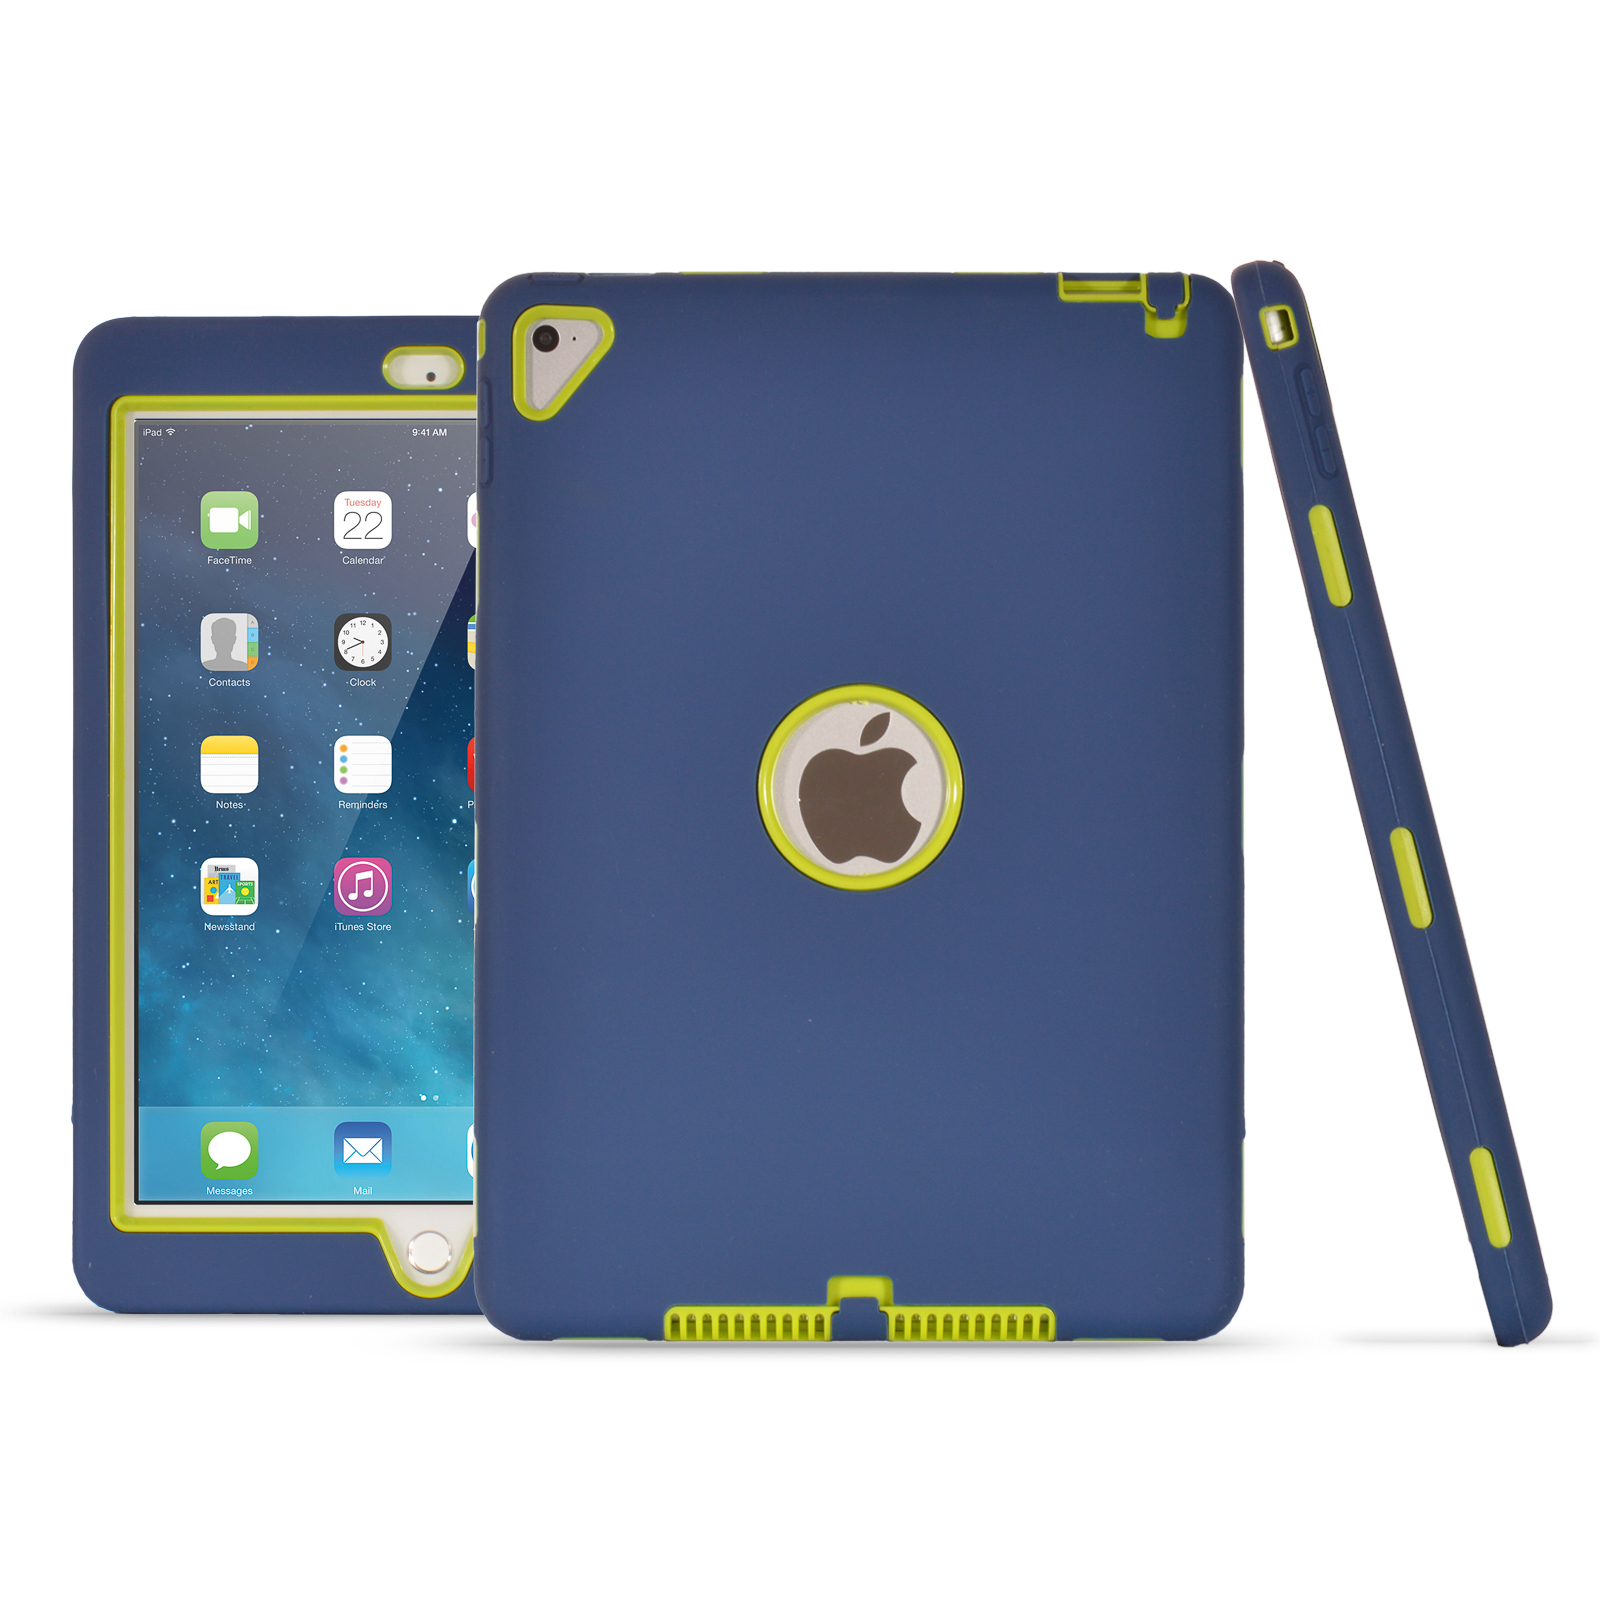 

Bakeey Armor Full Body Shockproof Tablet Case For iPad Air 2/iPad Pro 9.7" 2016